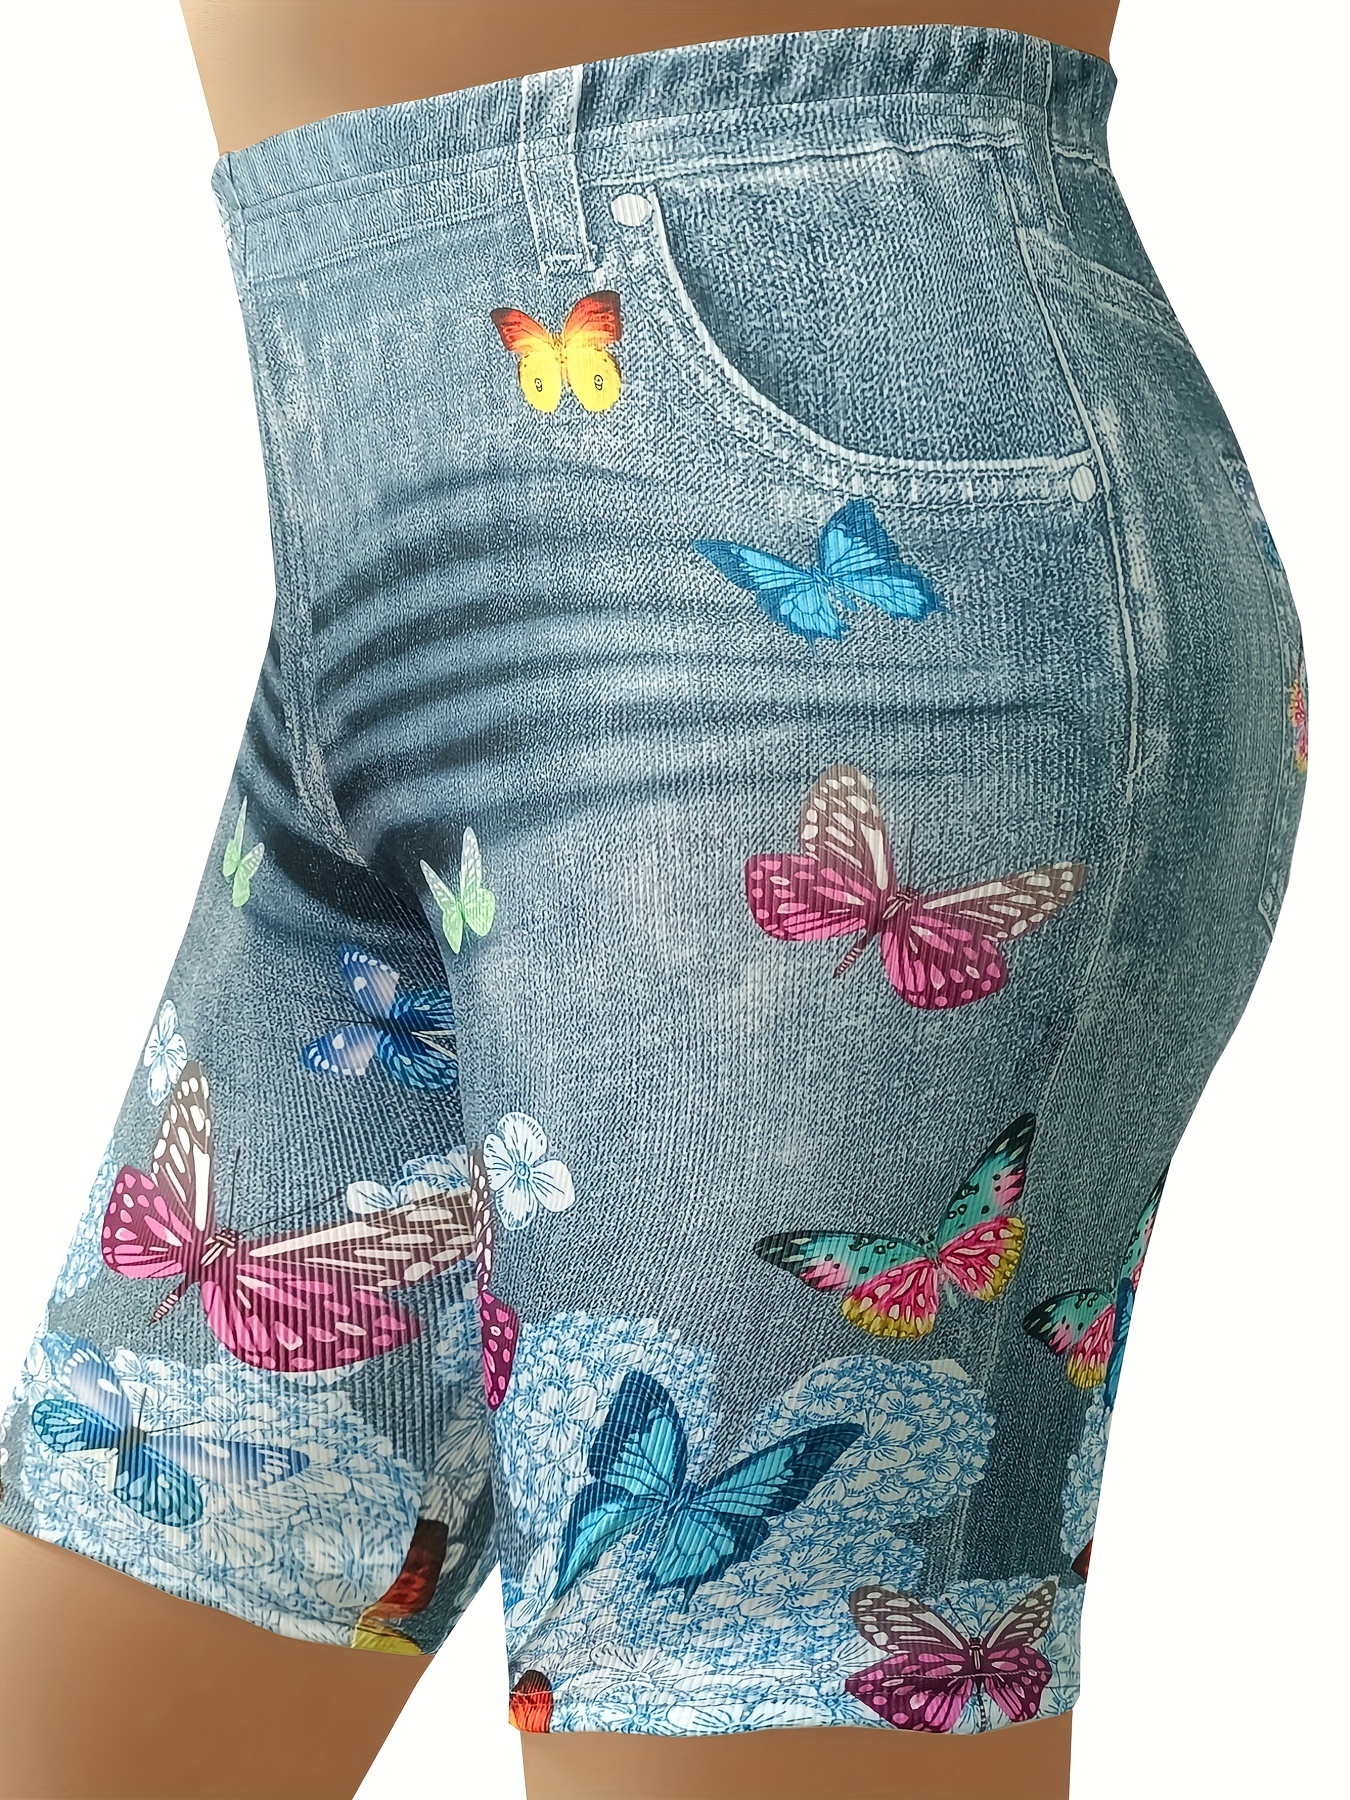  FUAIOKT Womens Stretchy Fake Denim Shorts Knee Length Butterfly  Floral Print Bermuda Short Jeans Plus Size Casual Leggings : Clothing,  Shoes & Jewelry